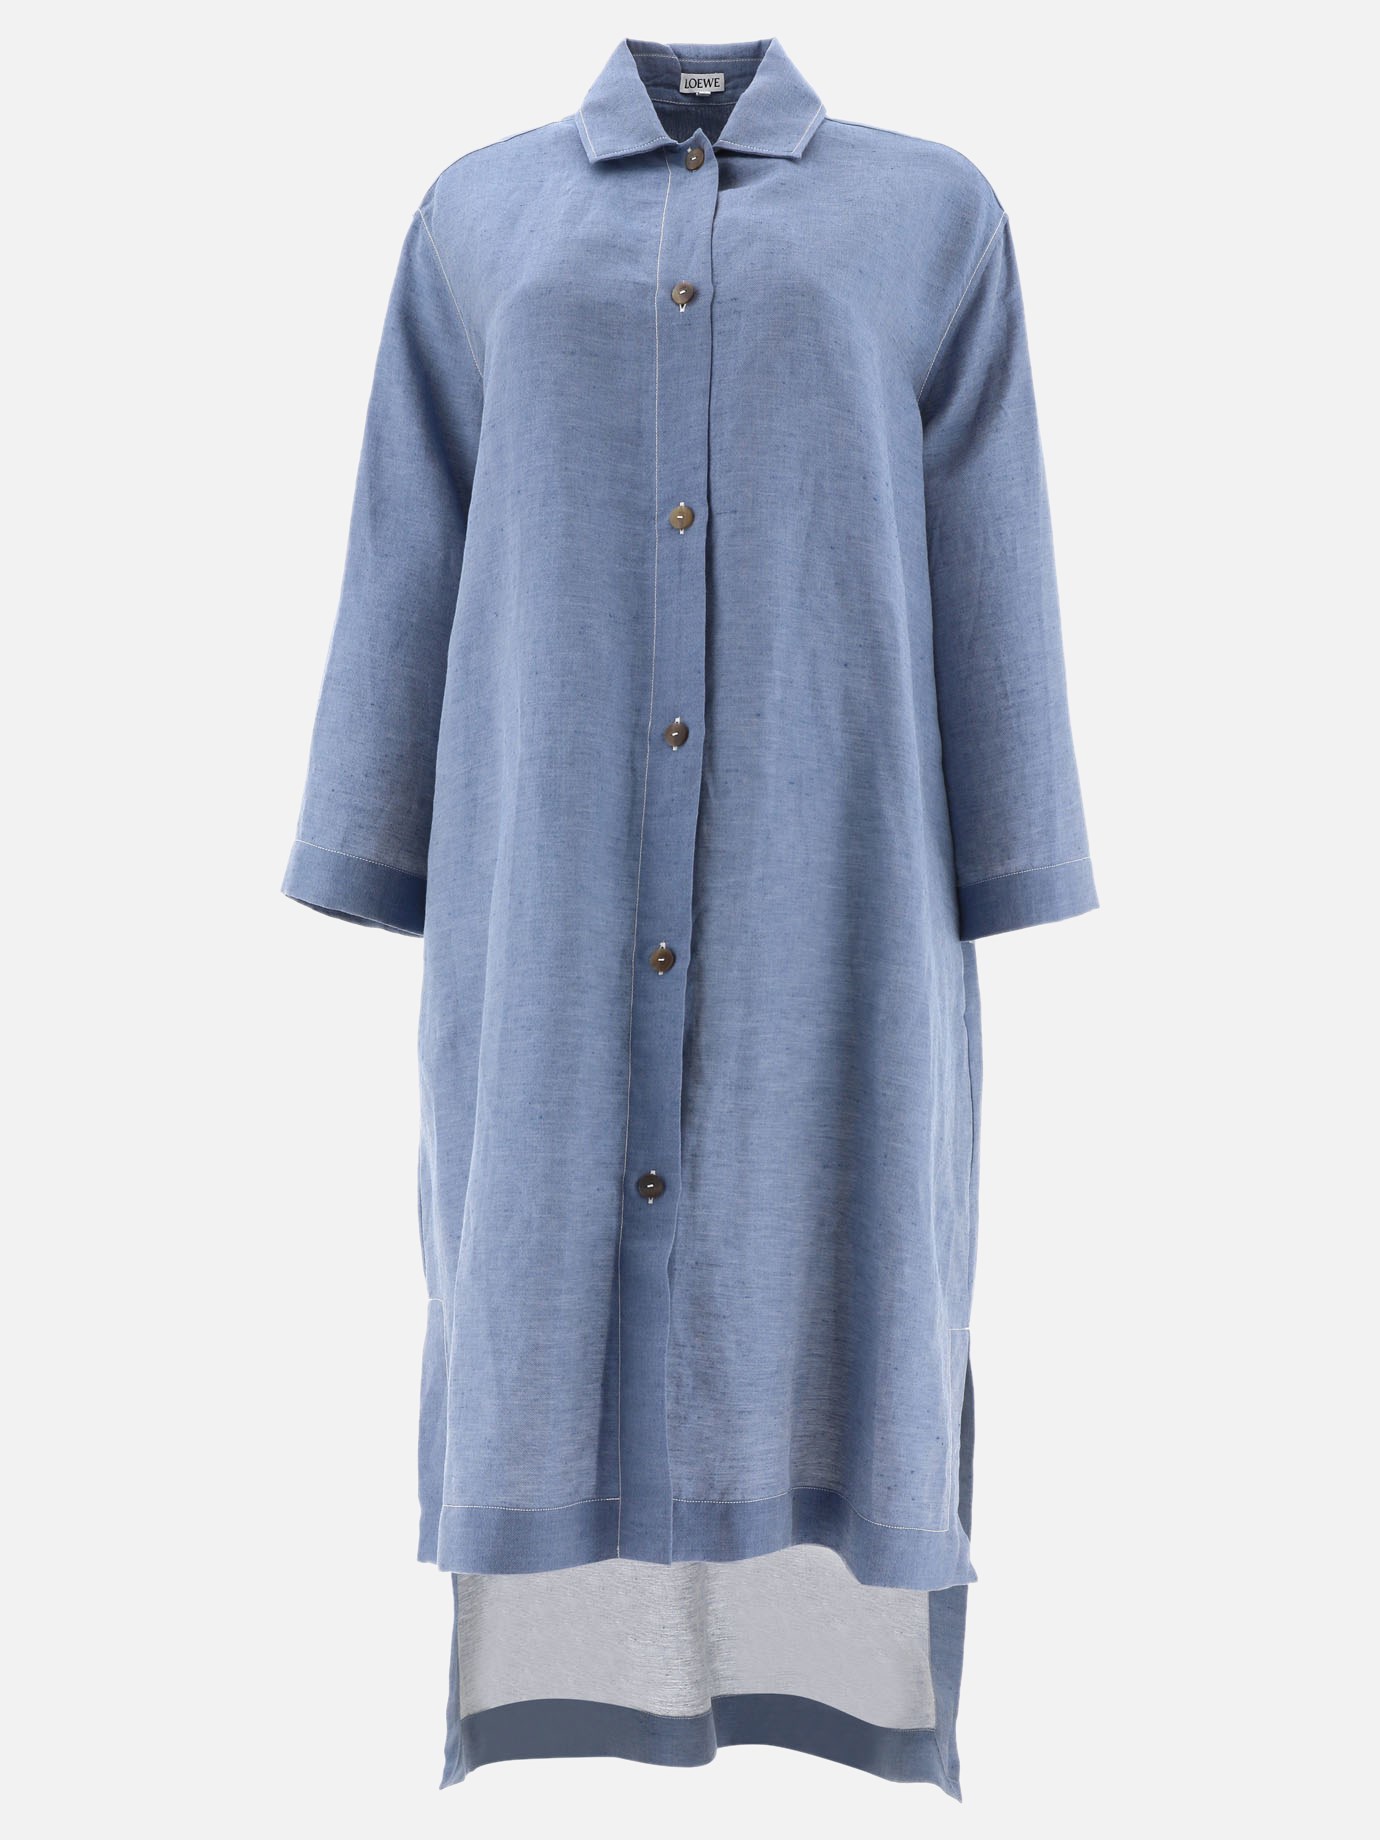 Tunic dress with buttons